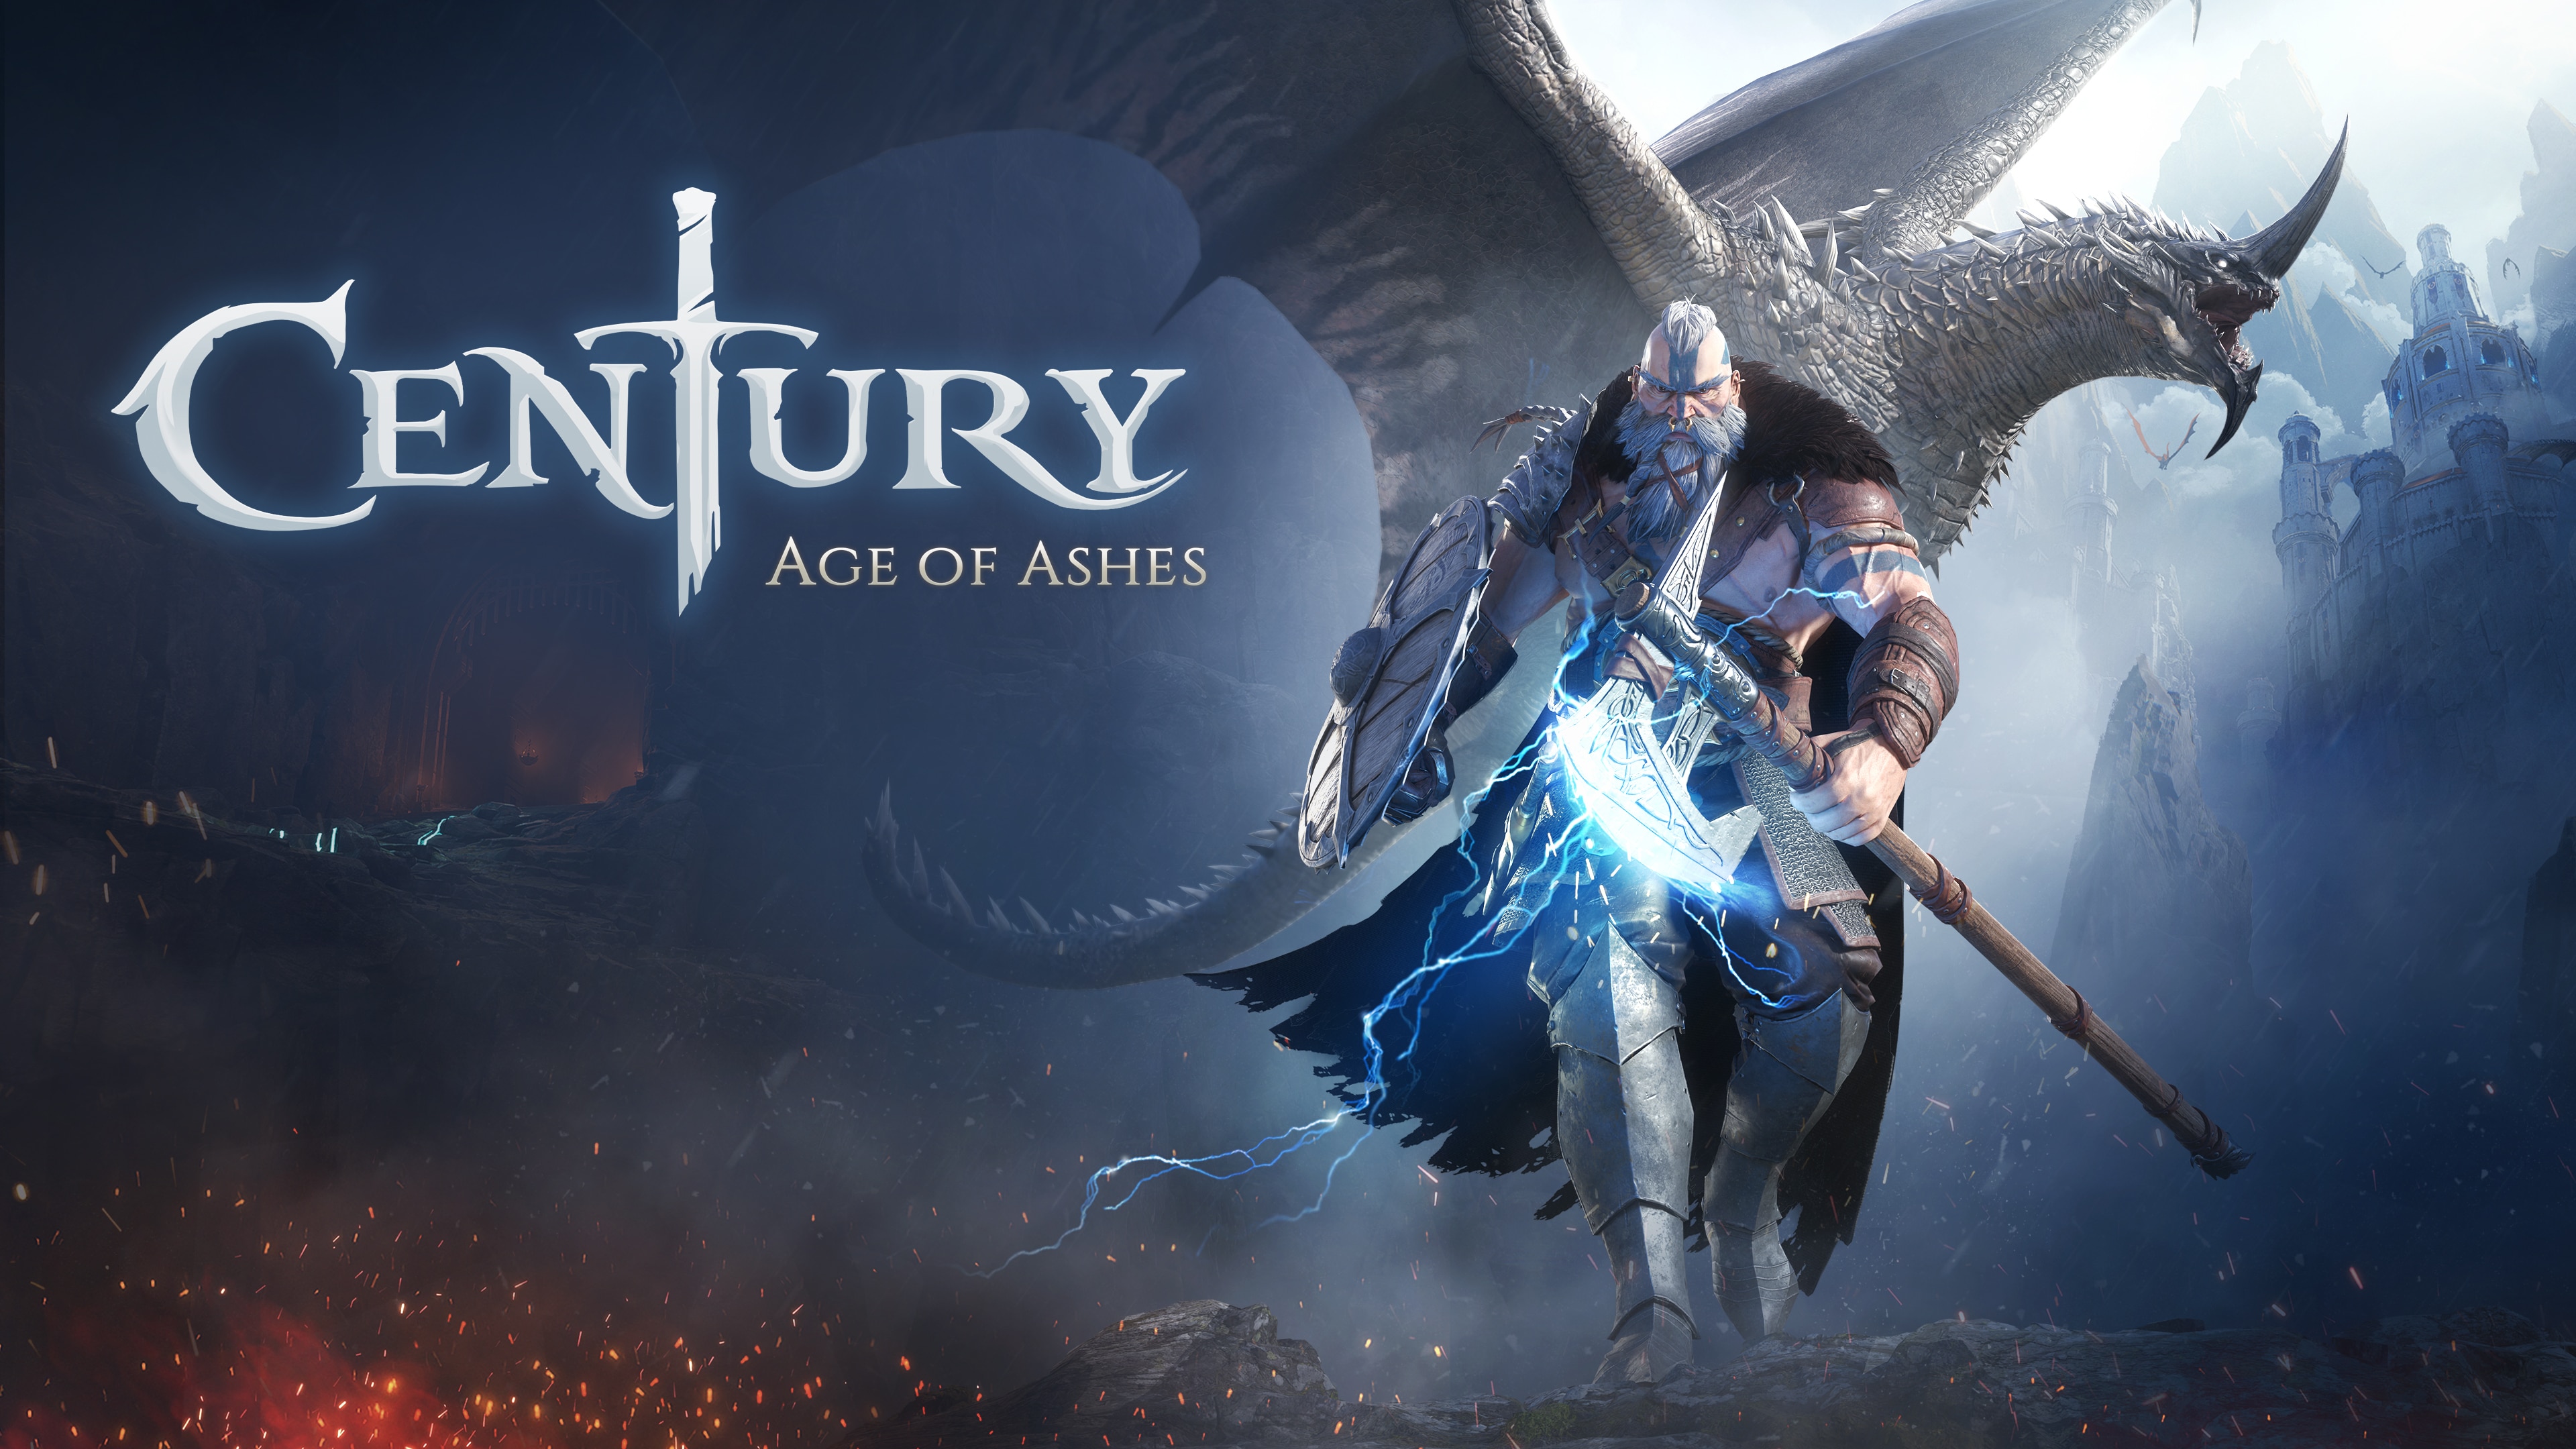 Century Age of Ashes Wallpapers